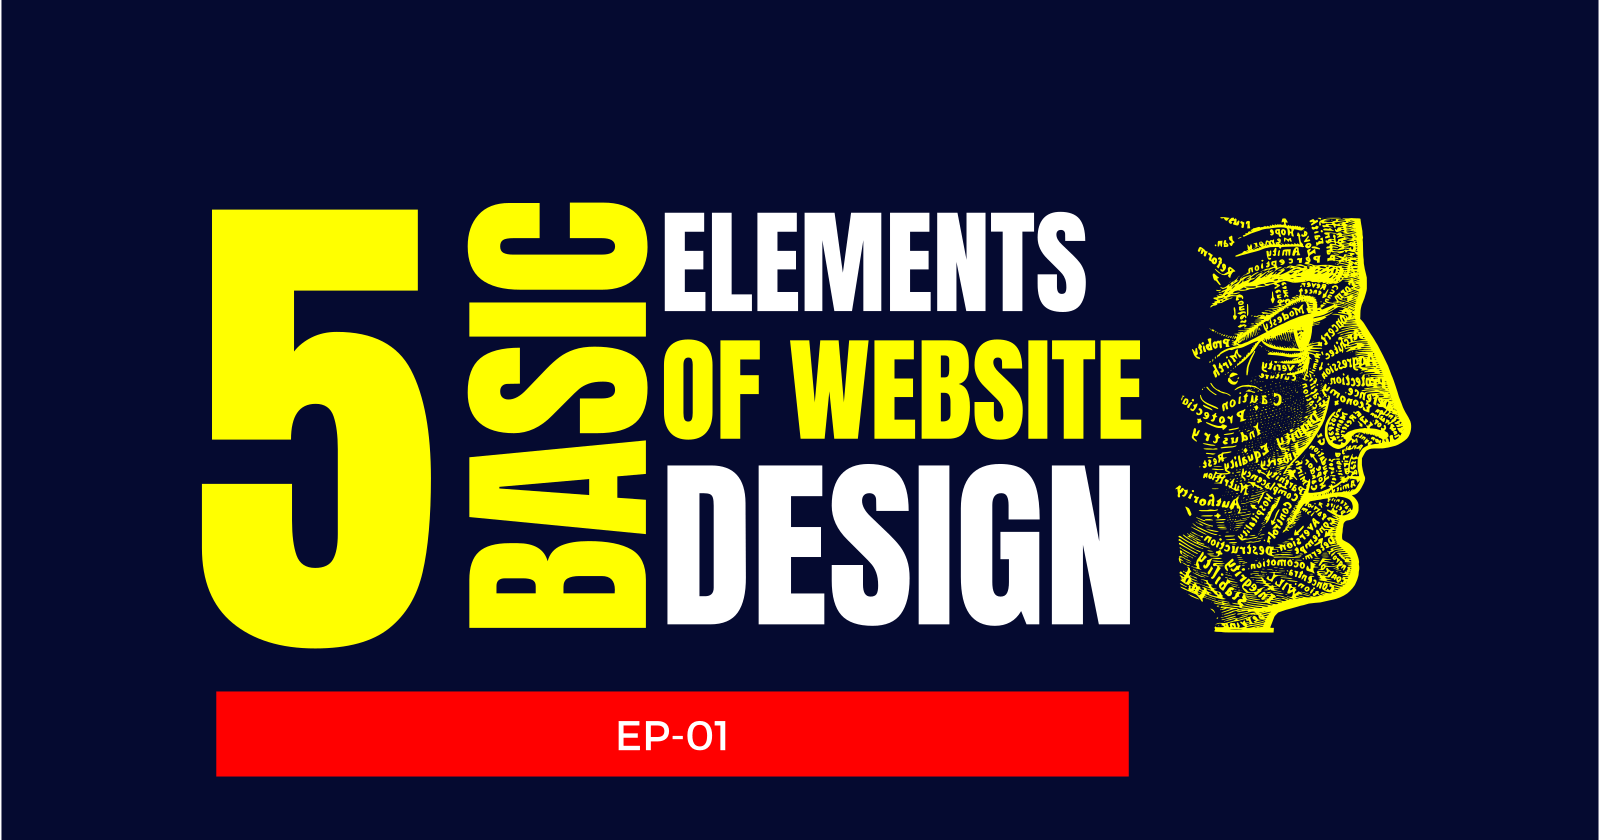 Surprising Elements that Make a Website Stand Out (EP_01)